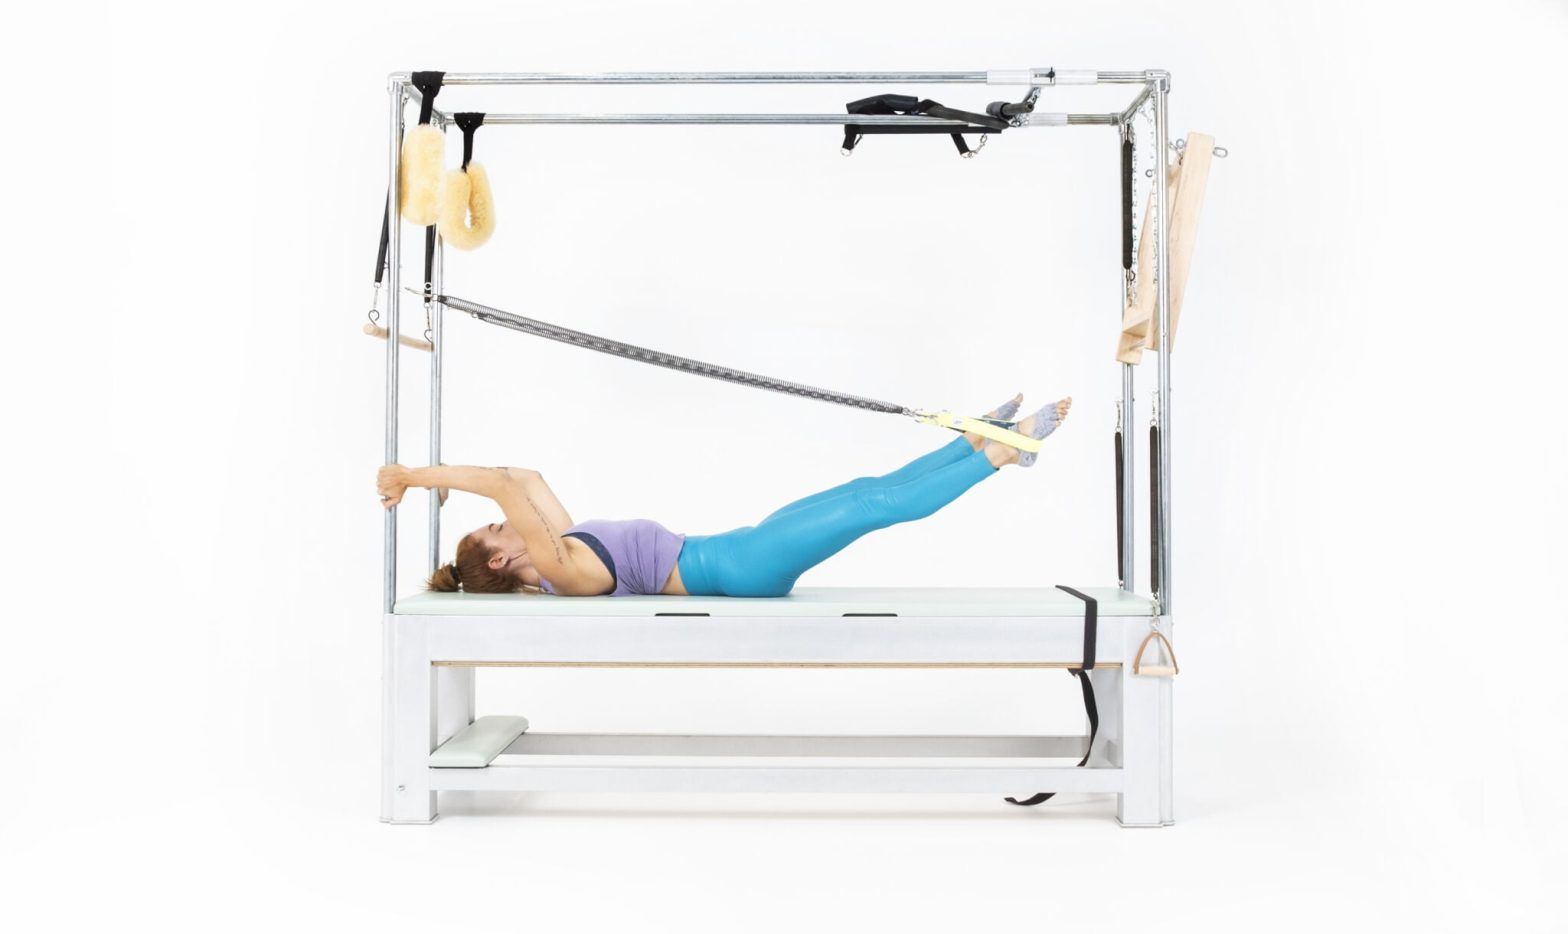 Beats with Leg Springs on the Cadillac or Tower - Online Pilates Classes